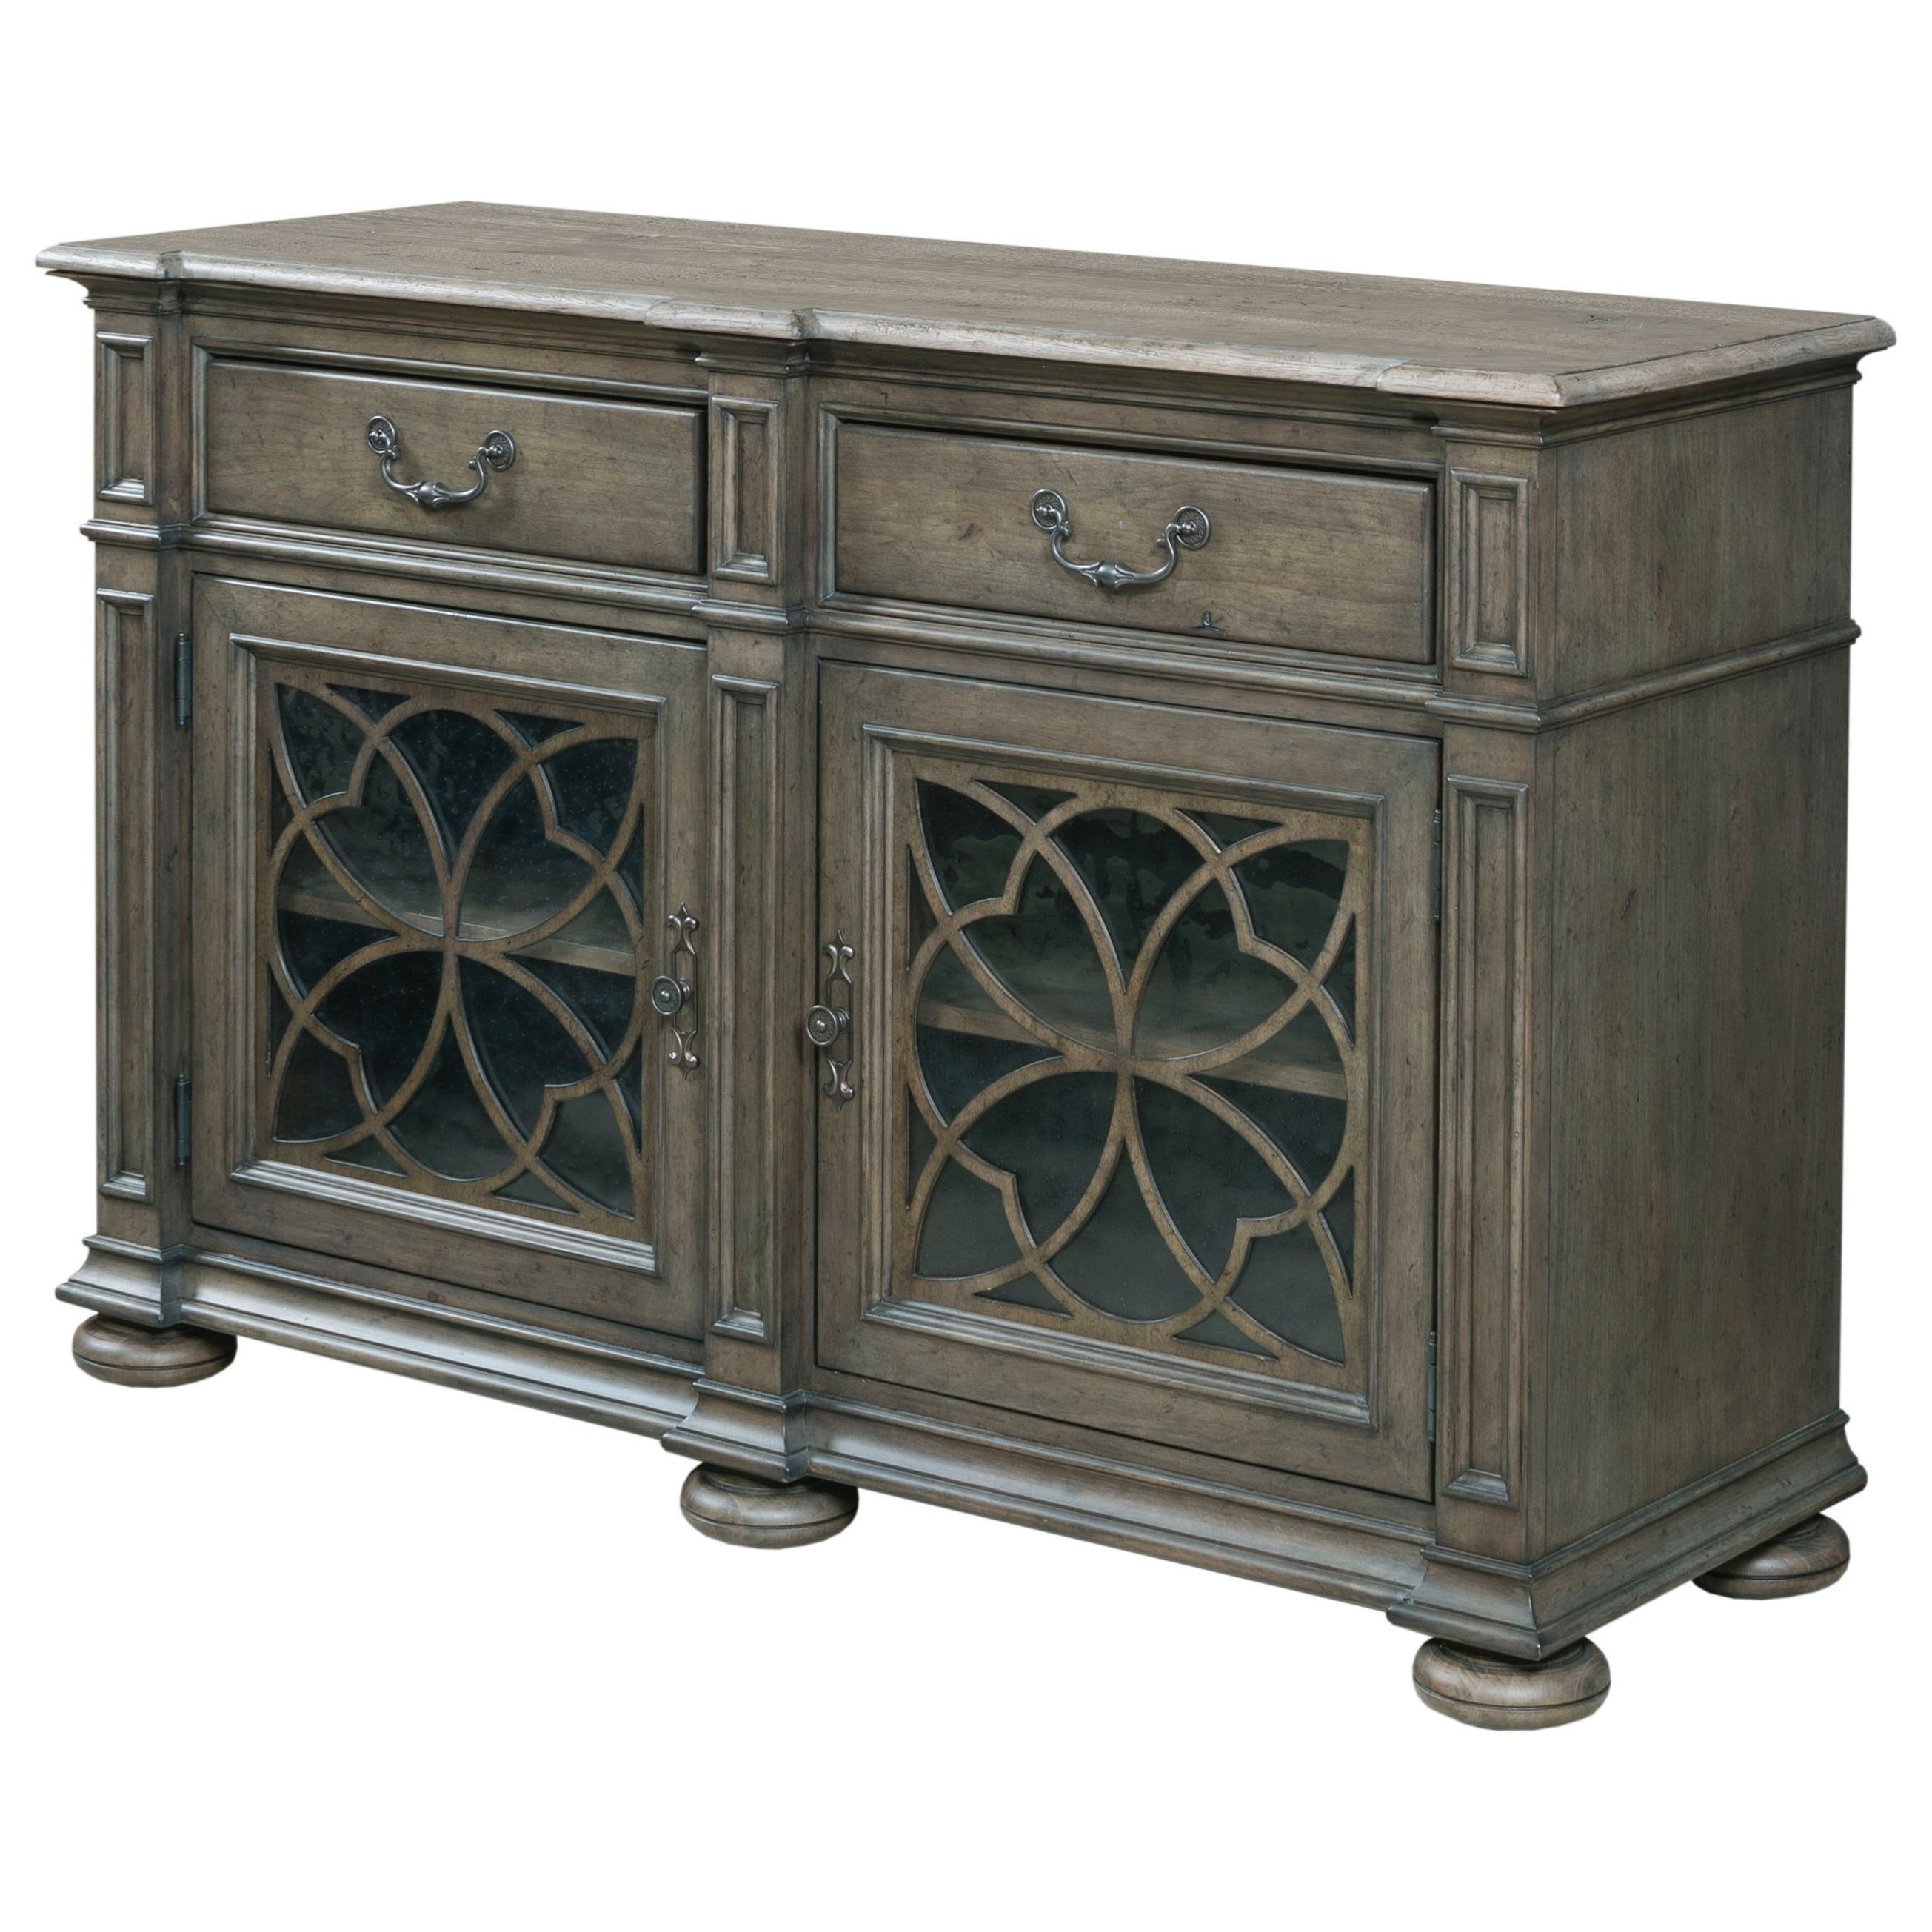 Greyson Harper Two Door Buffet With Silverware Storage And Seed Glass Doors Kincaid Furniture At Reid's Furniture Throughout Wooden Curio Buffets With Two Glass Doors (View 10 of 20)